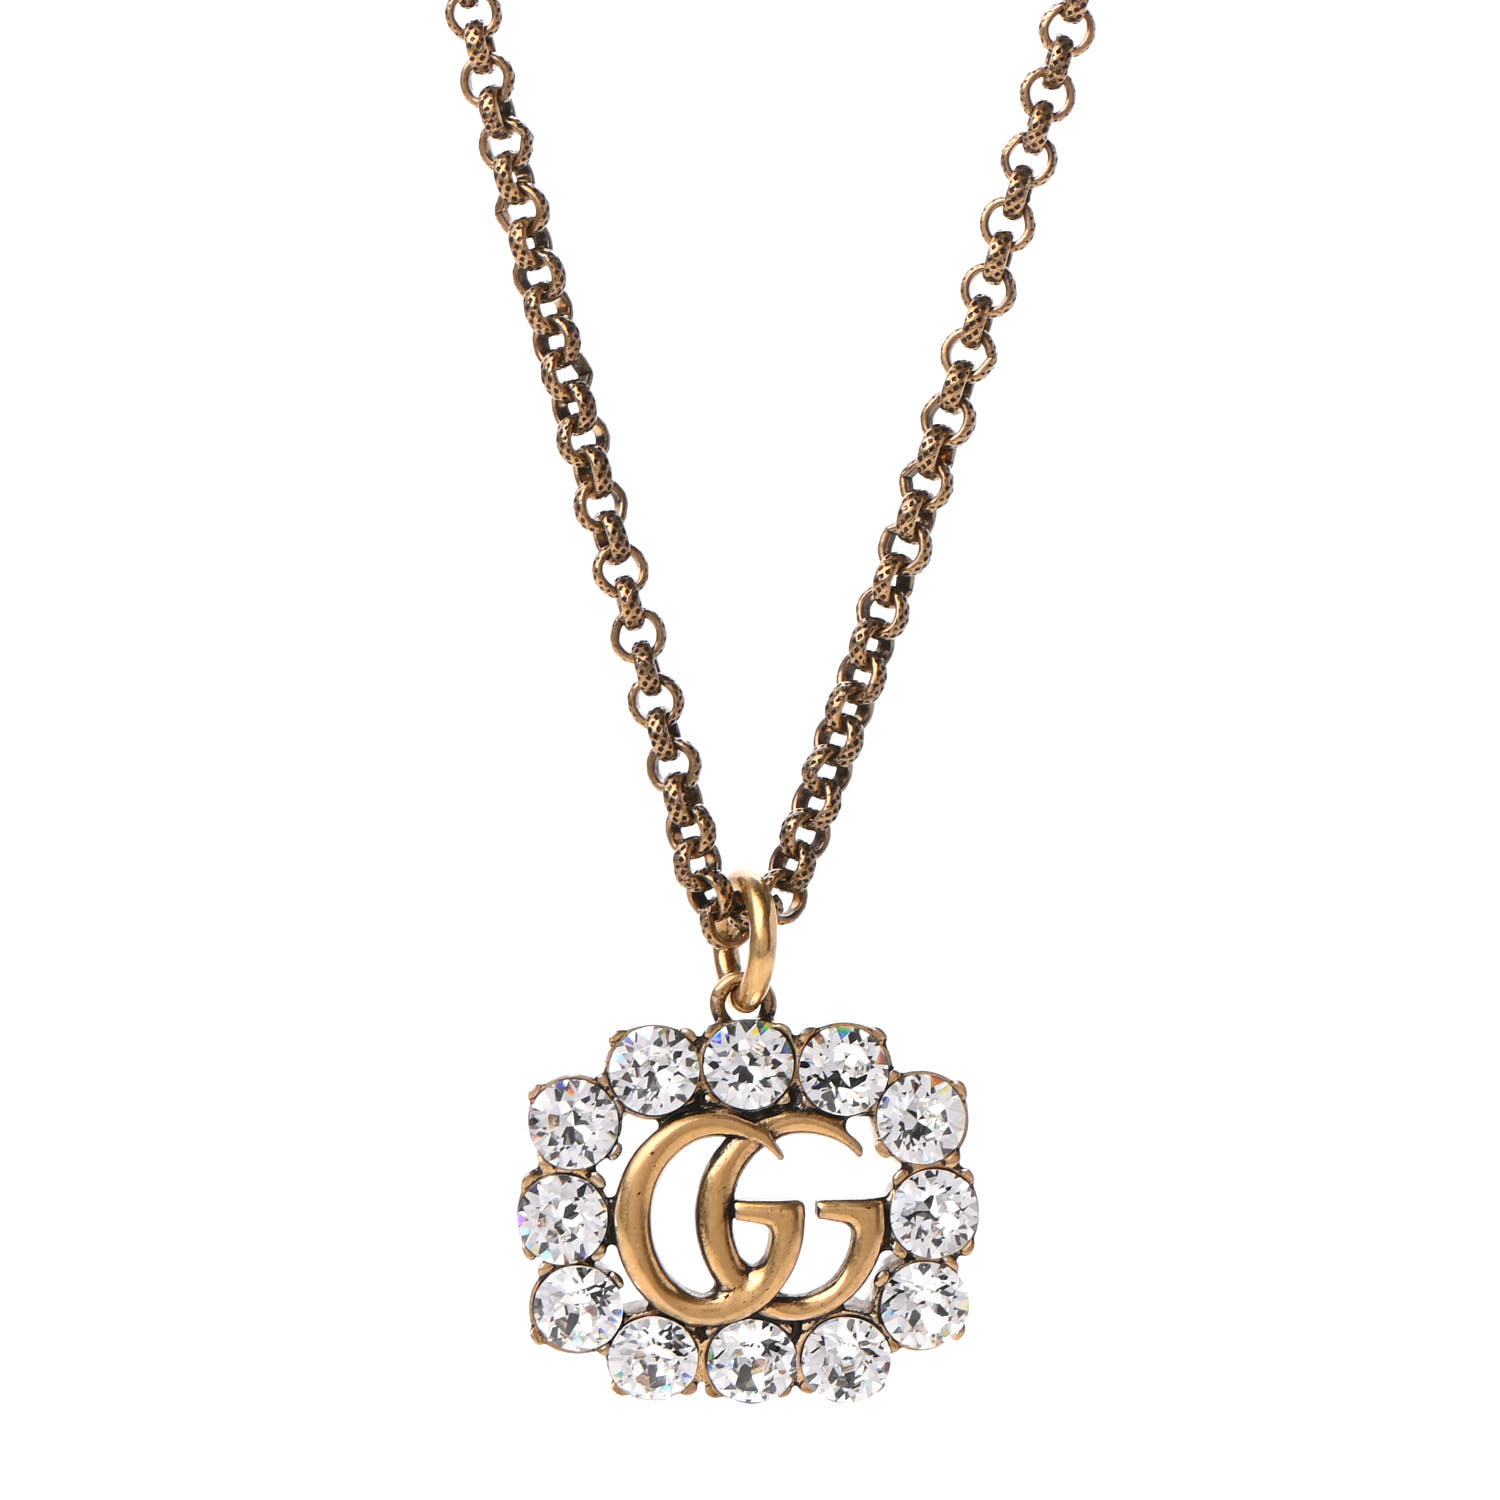 GUCCI Crystal Embellished Double G Necklace Aged Gold 745506 | FASHIONPHILE